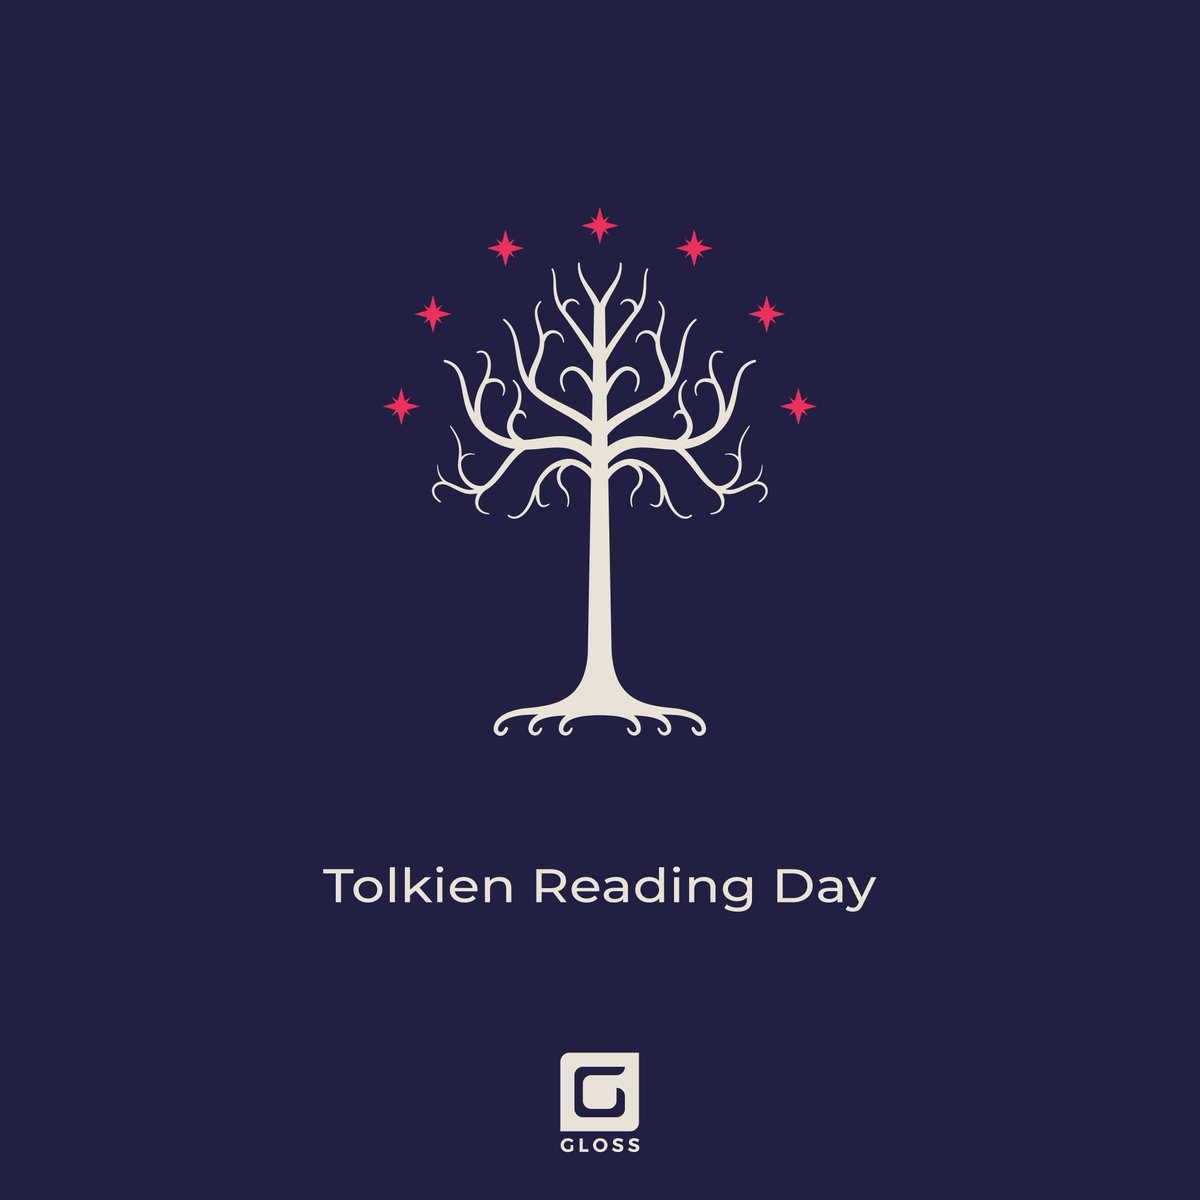 Happy #TolkienReadingDay ⚔️
Did you know? The 25th of March is the date of the downfall of the #LordoftheRings (Sauron) 👑 and the fall of #Barad-dûr ♟👁
Happy reading to all the #tolkienlovers
.
.
INSPIRE • DEVELOP • ACHIEVE
🚀 🚀🚀🚀🚀🚀🚀🚀🚀